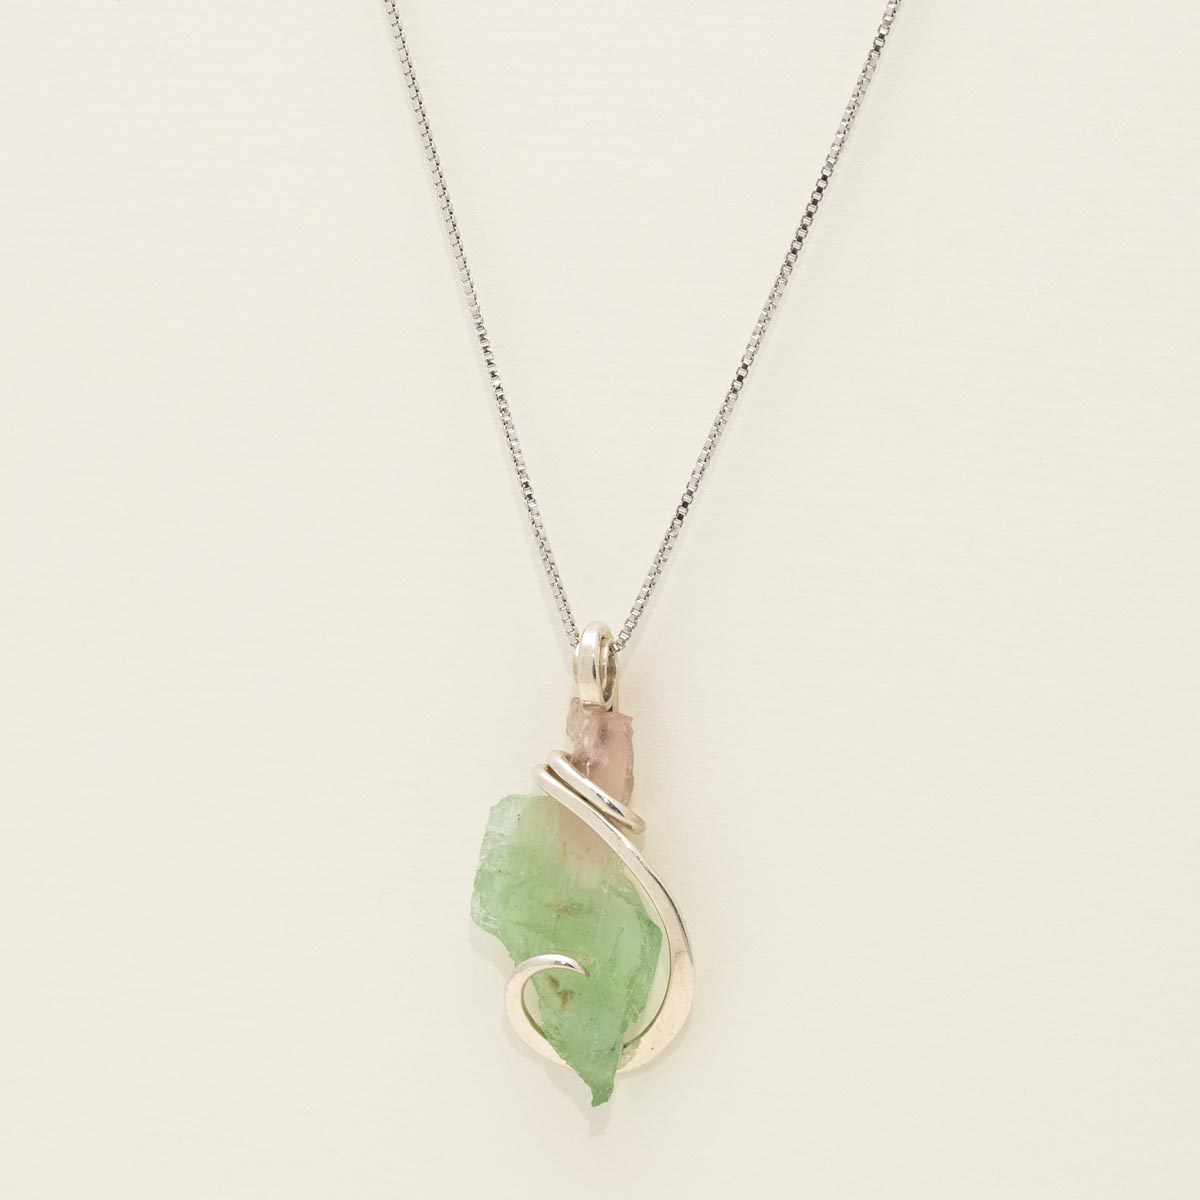 Maine Bicolor Tourmaline Necklace in Sterling Silver